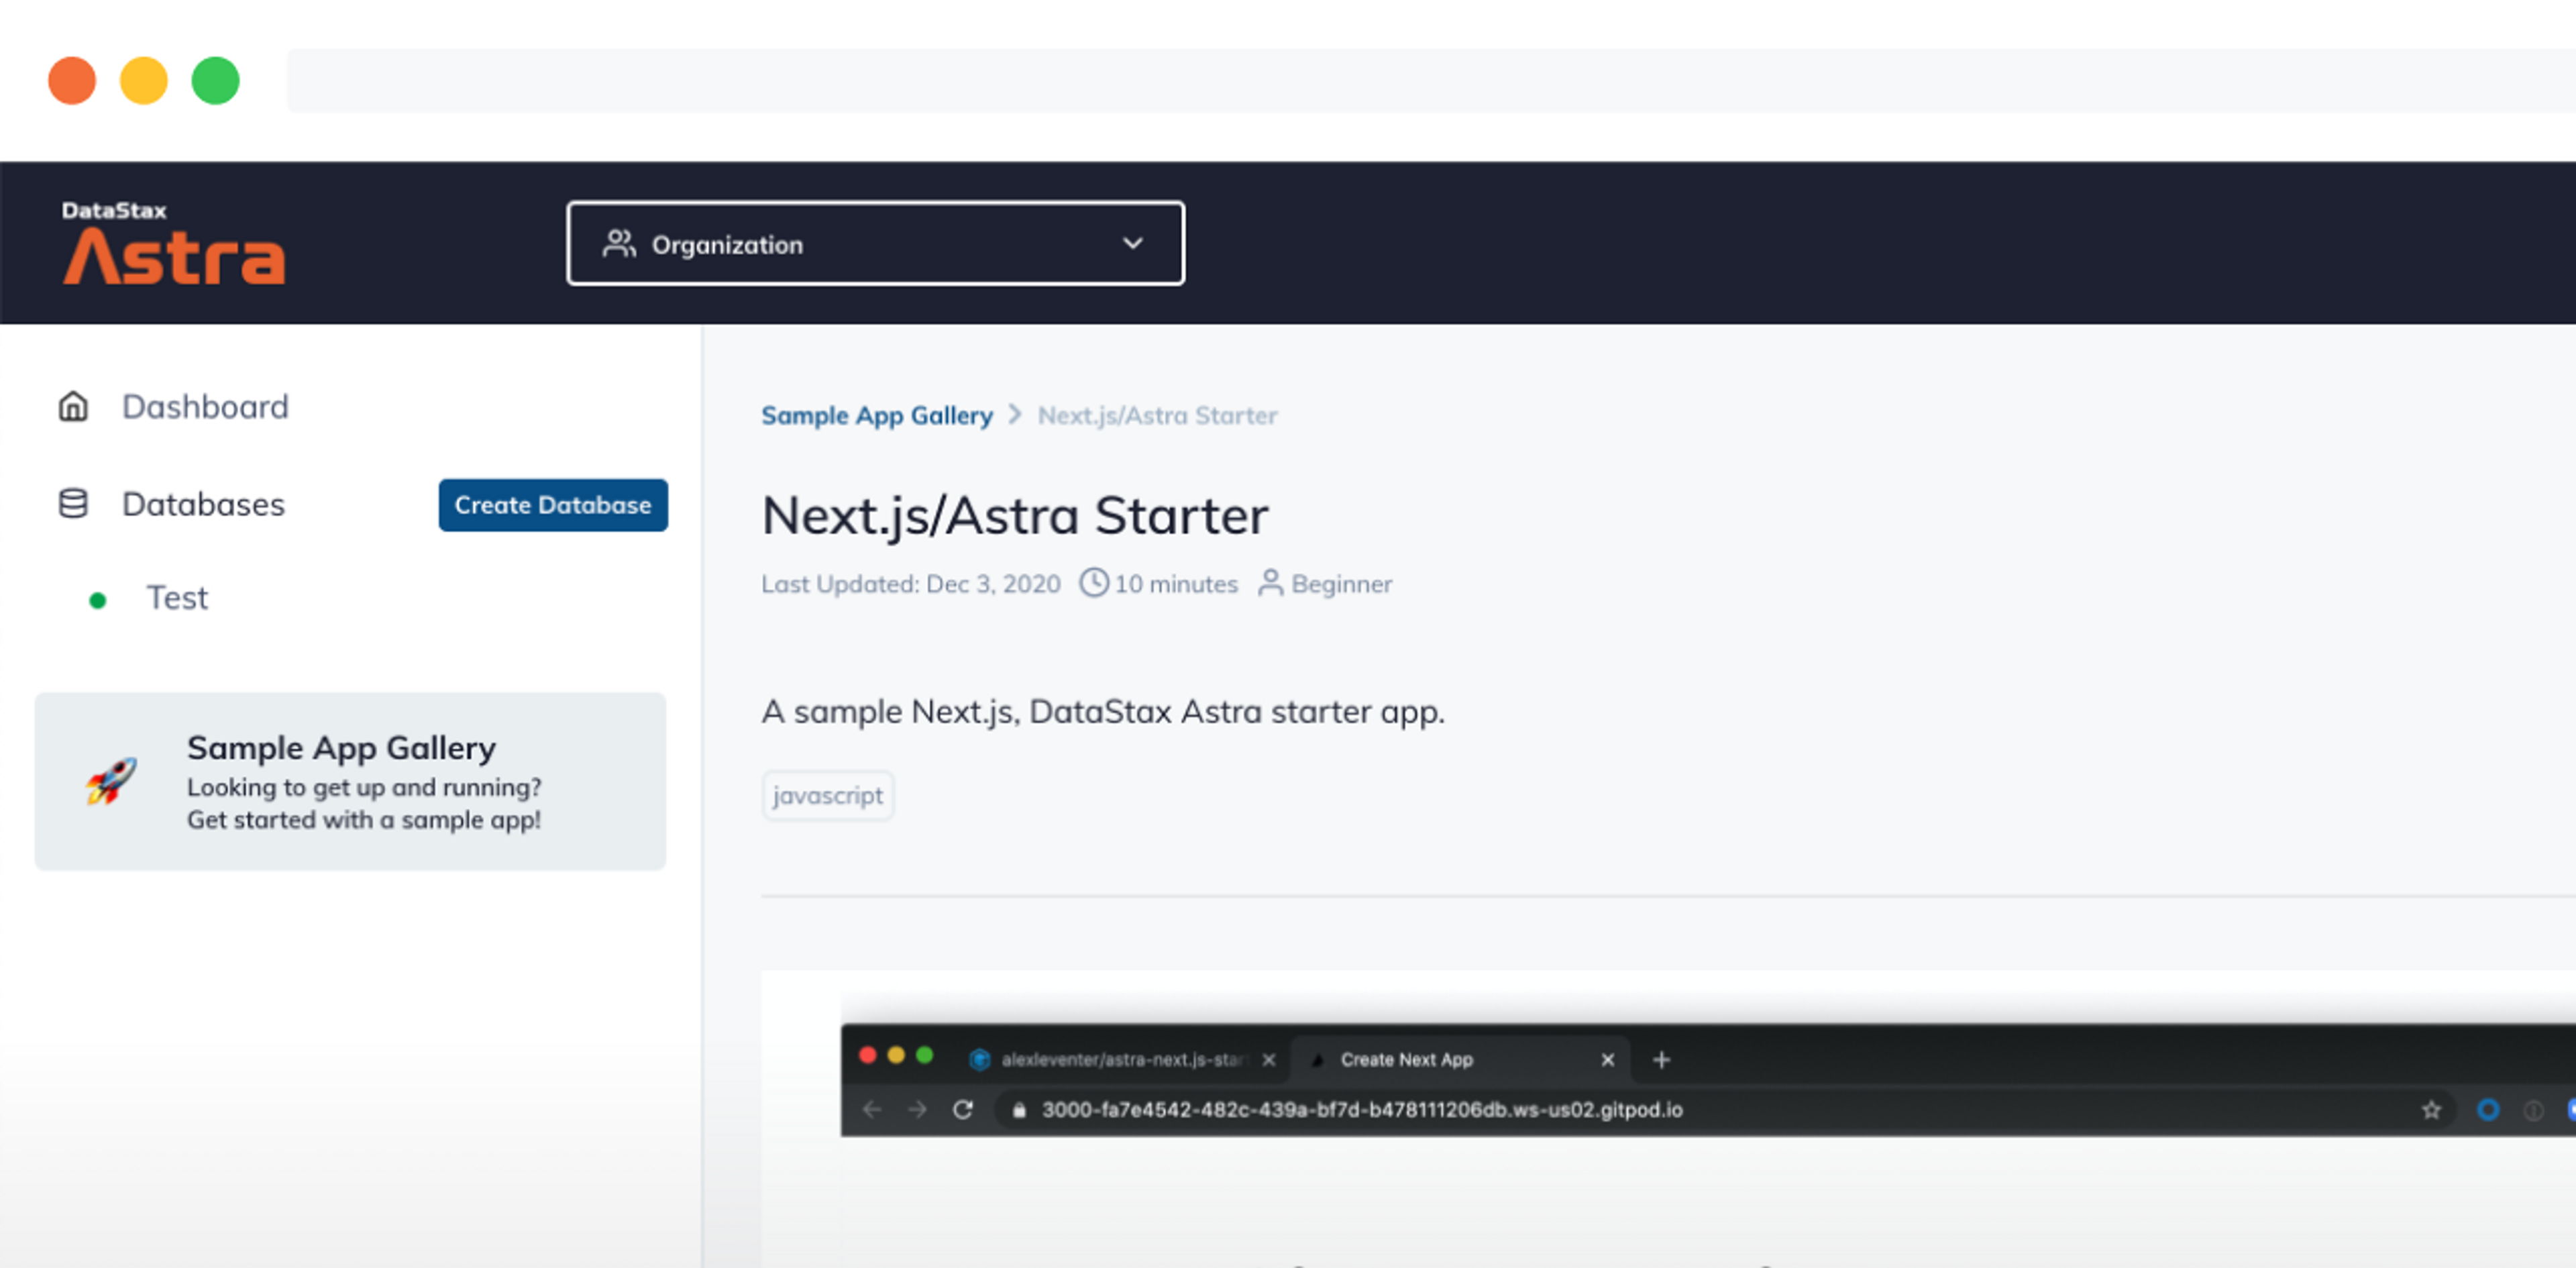 Explore The Stargate REST API In DataStax Astra With This Next.Js Starter App.